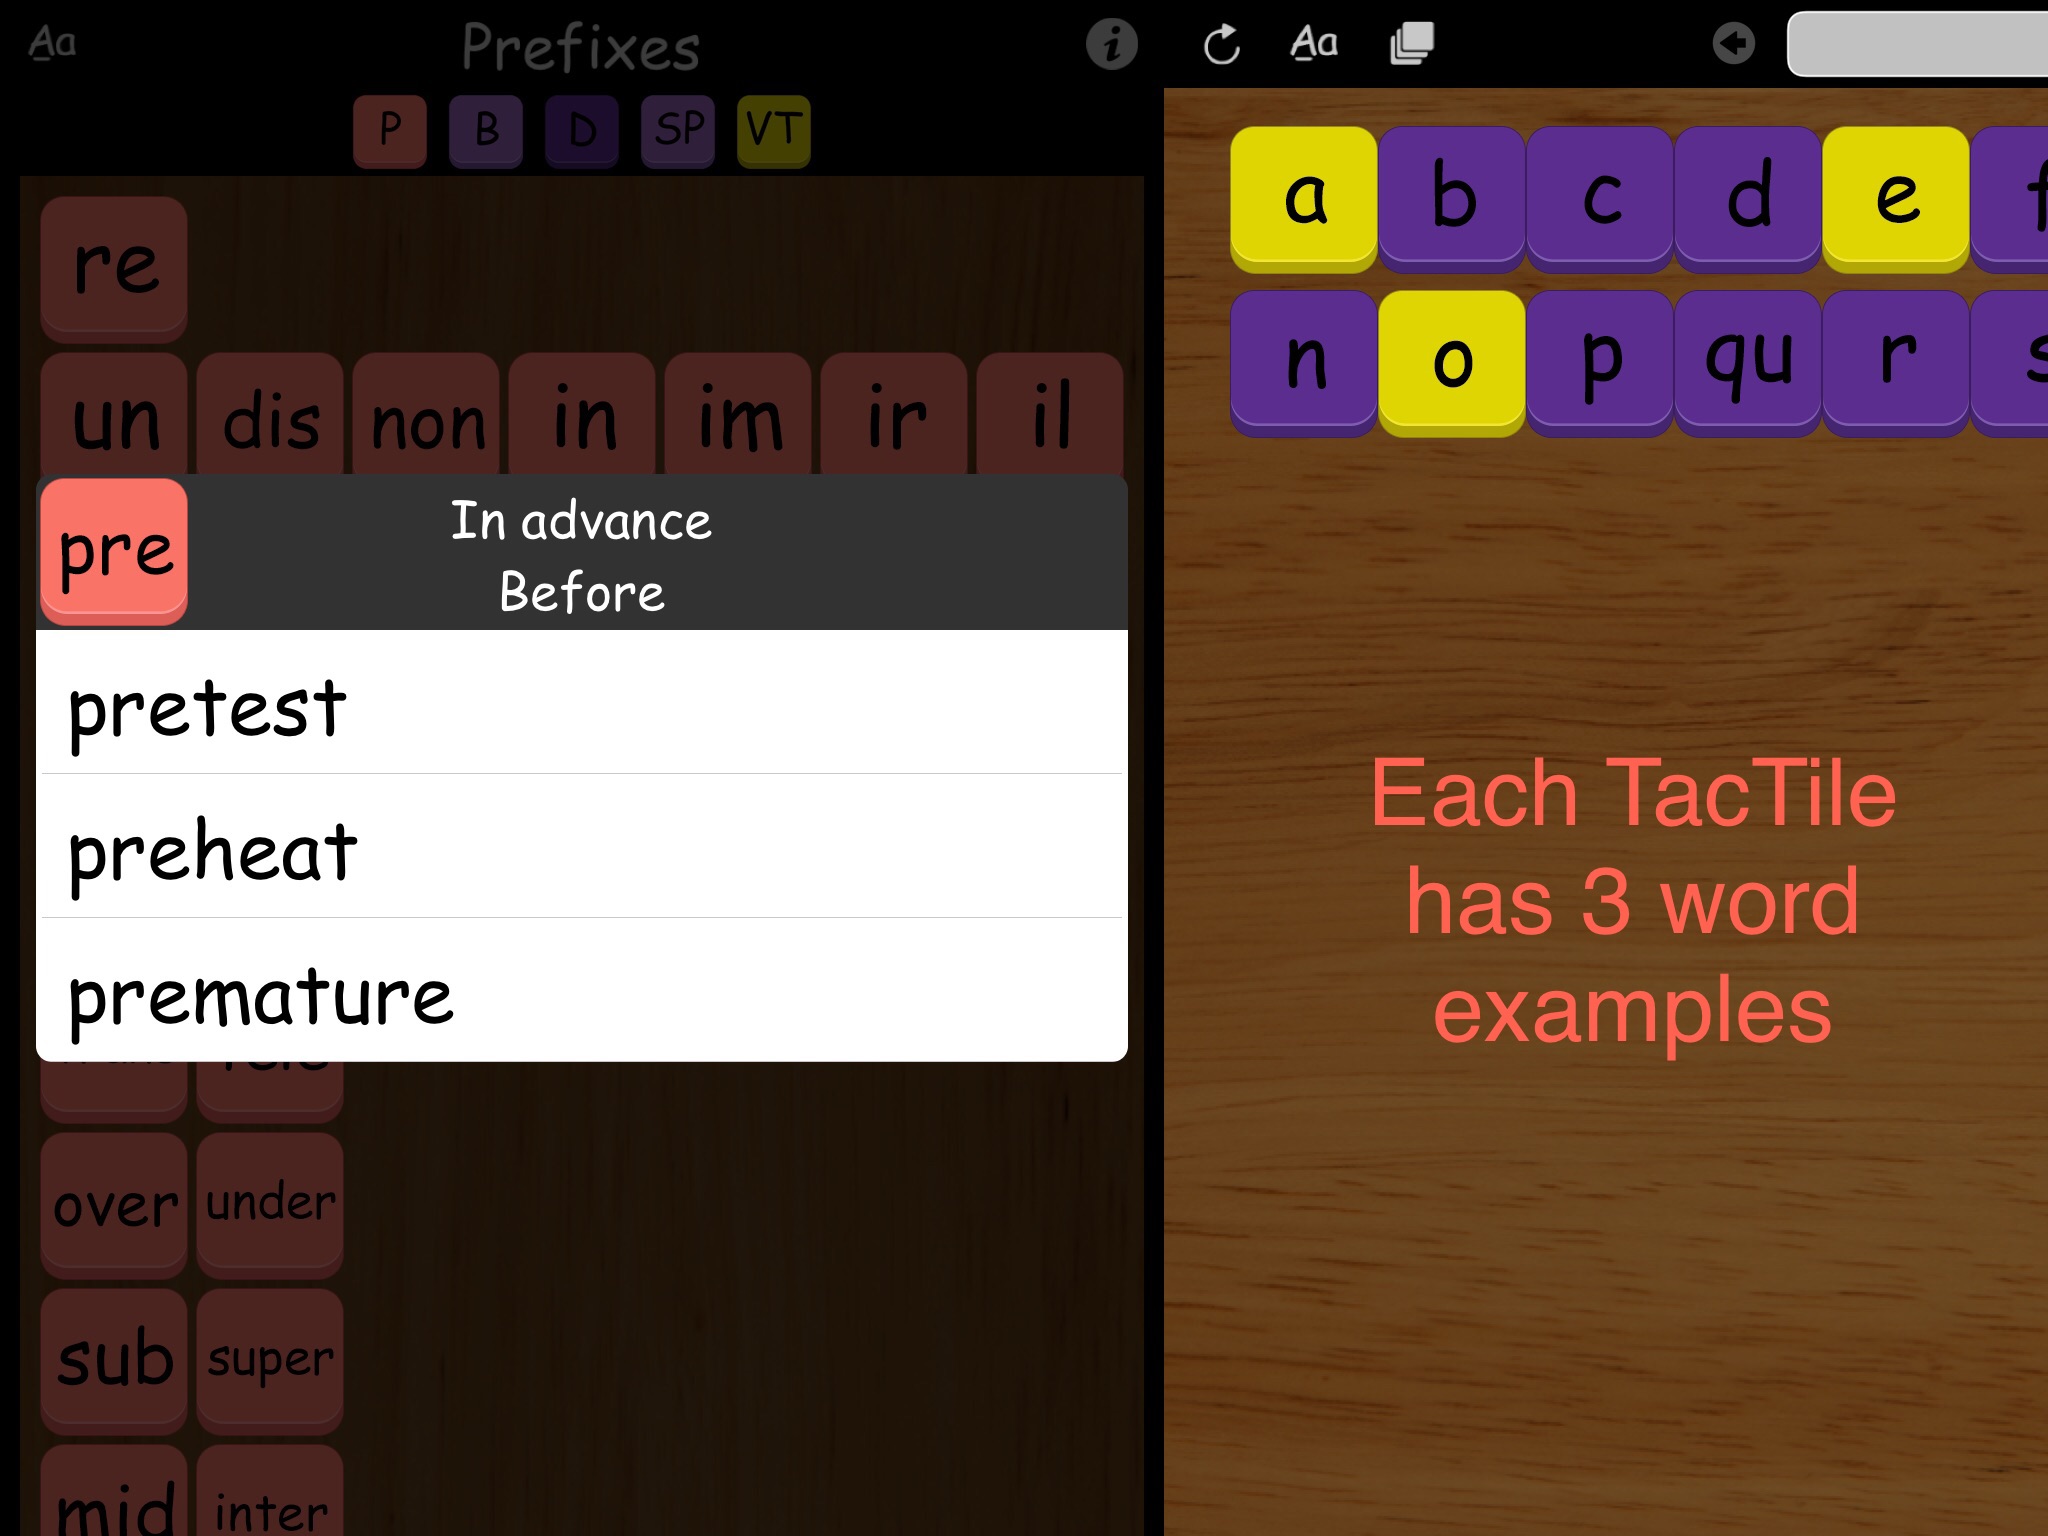 TacTilesApp - Definitions and Word Examples